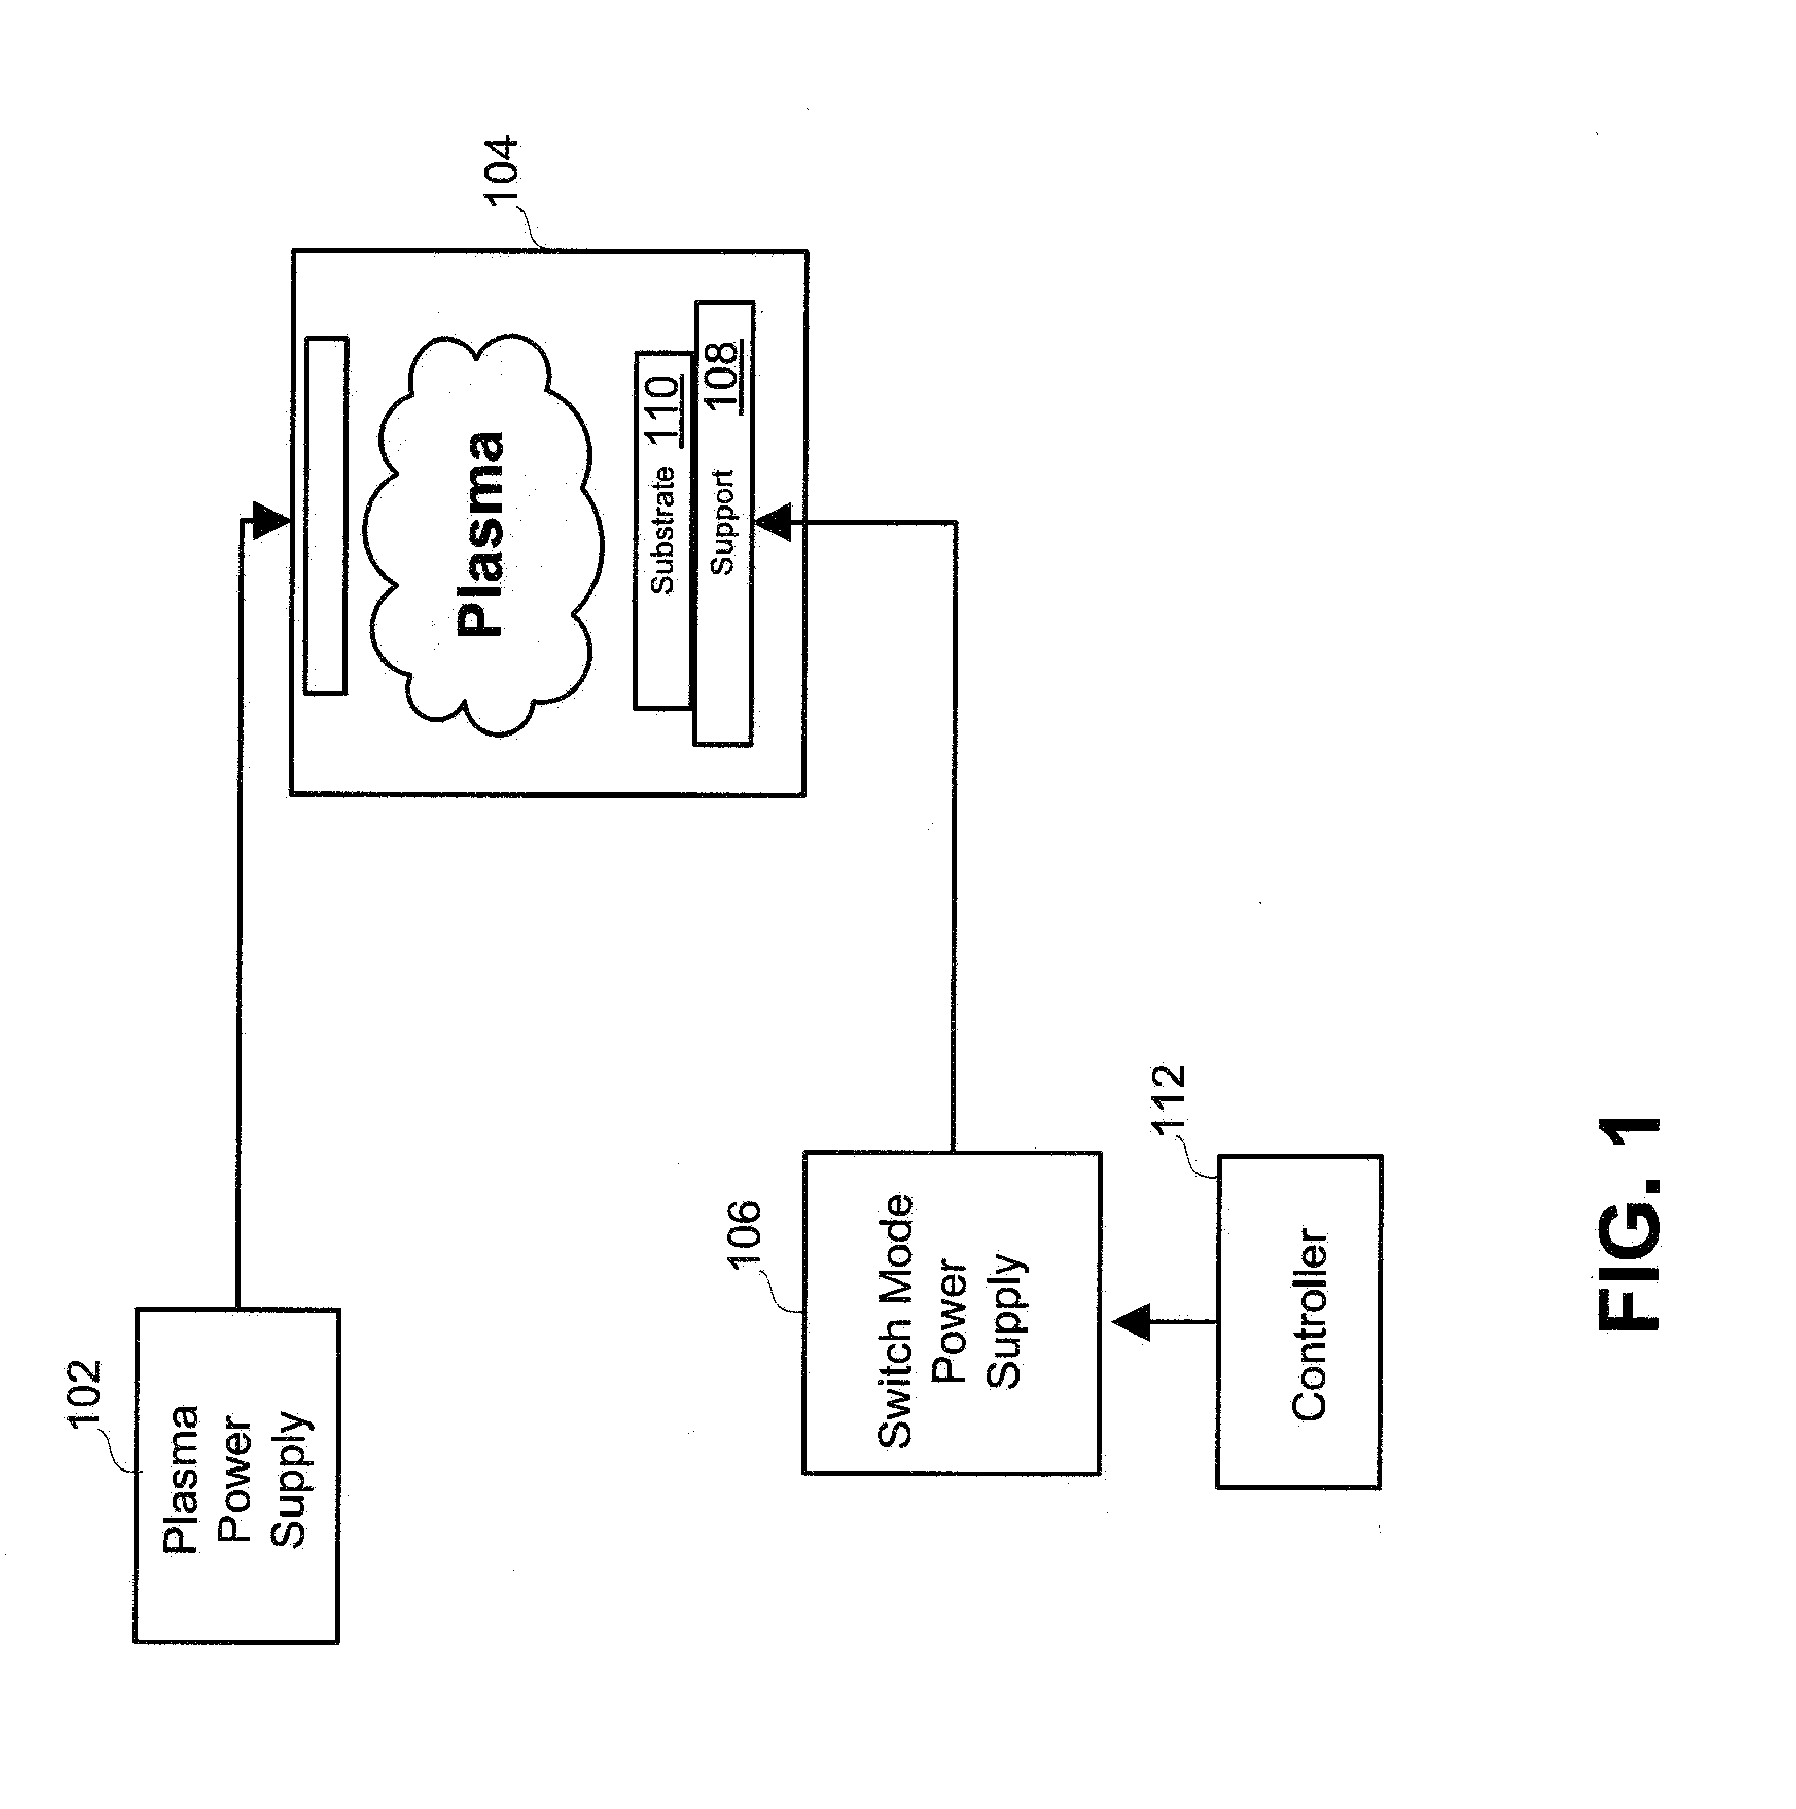 Systems and methods for monitoring faults, anomalies, and other characteristics of a switched mode ion energy distribution system